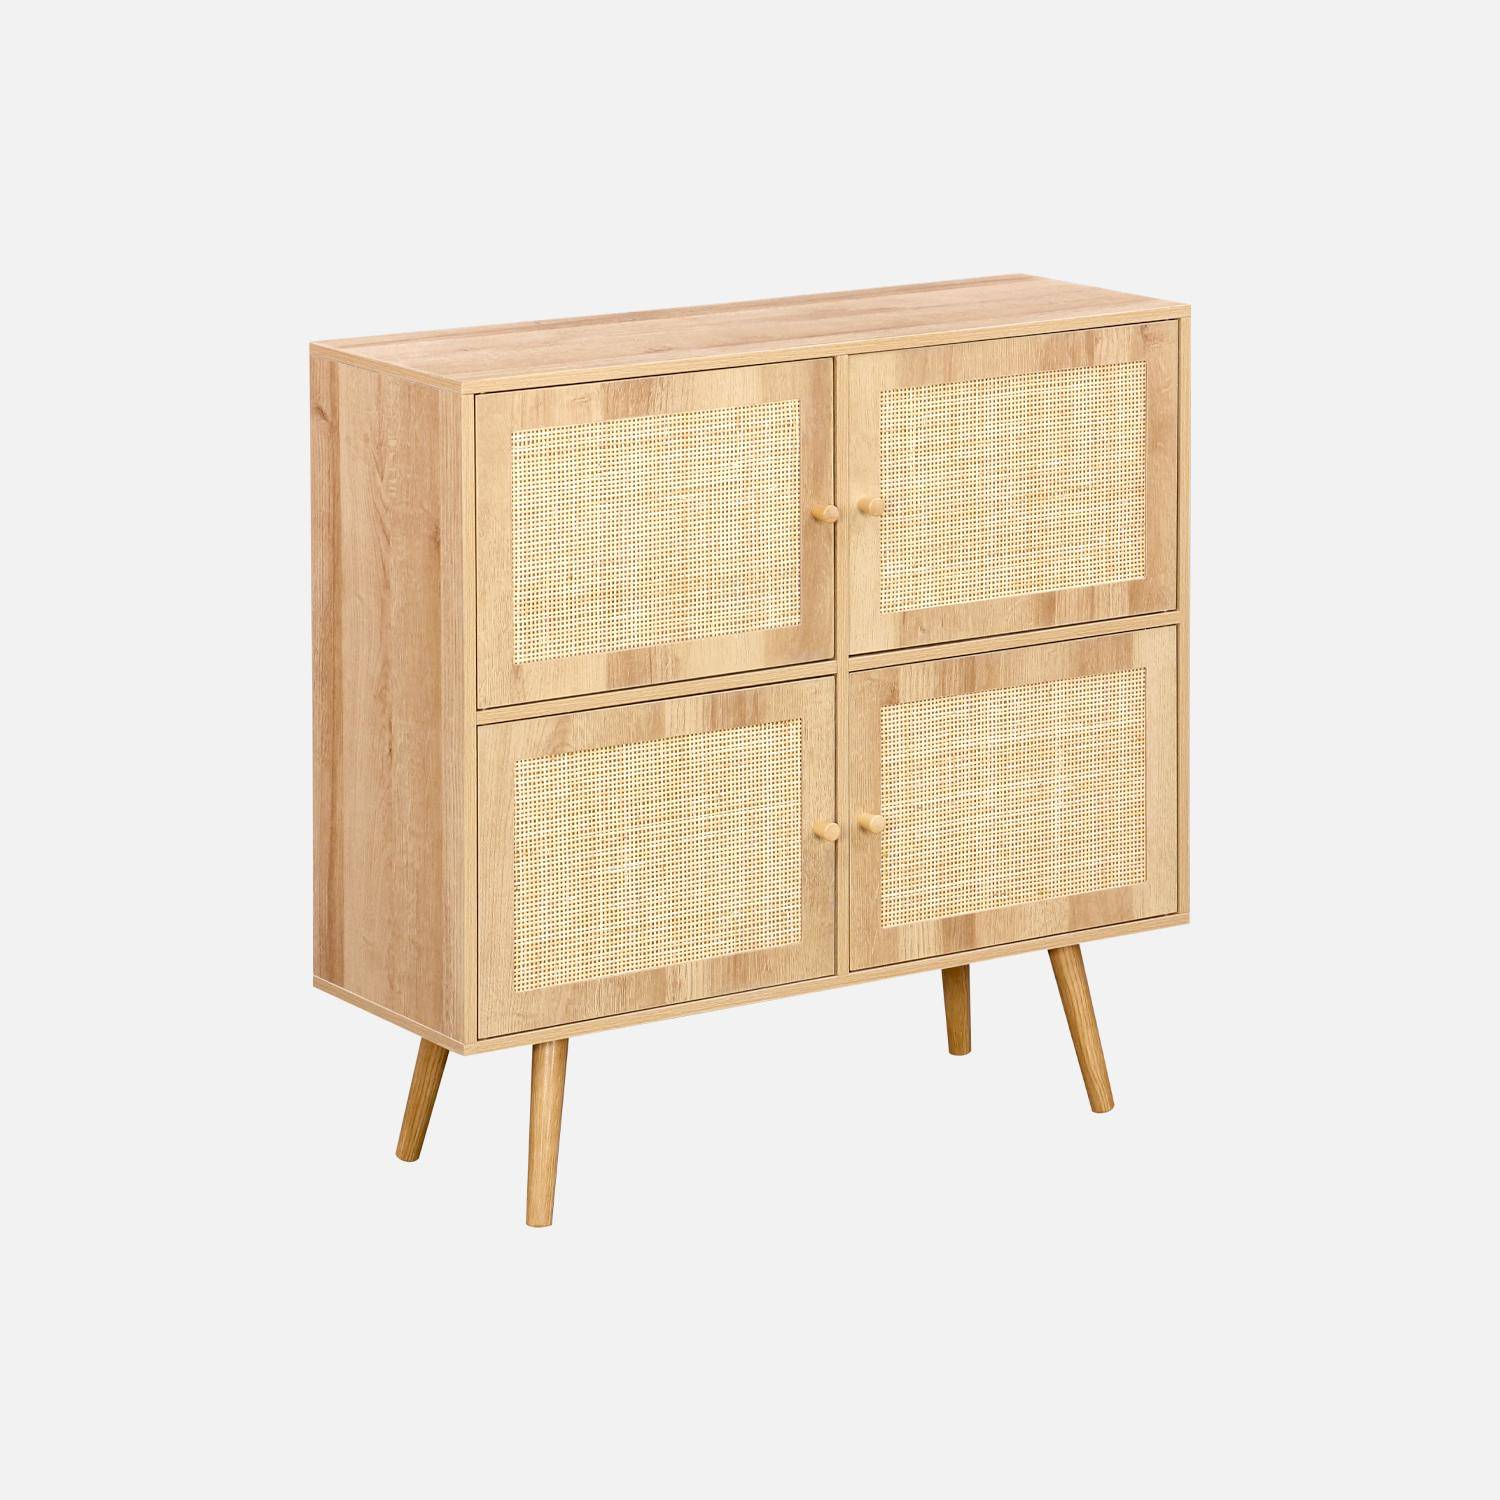 Wood-effect 4-door cane children's chest of drawers Photo5